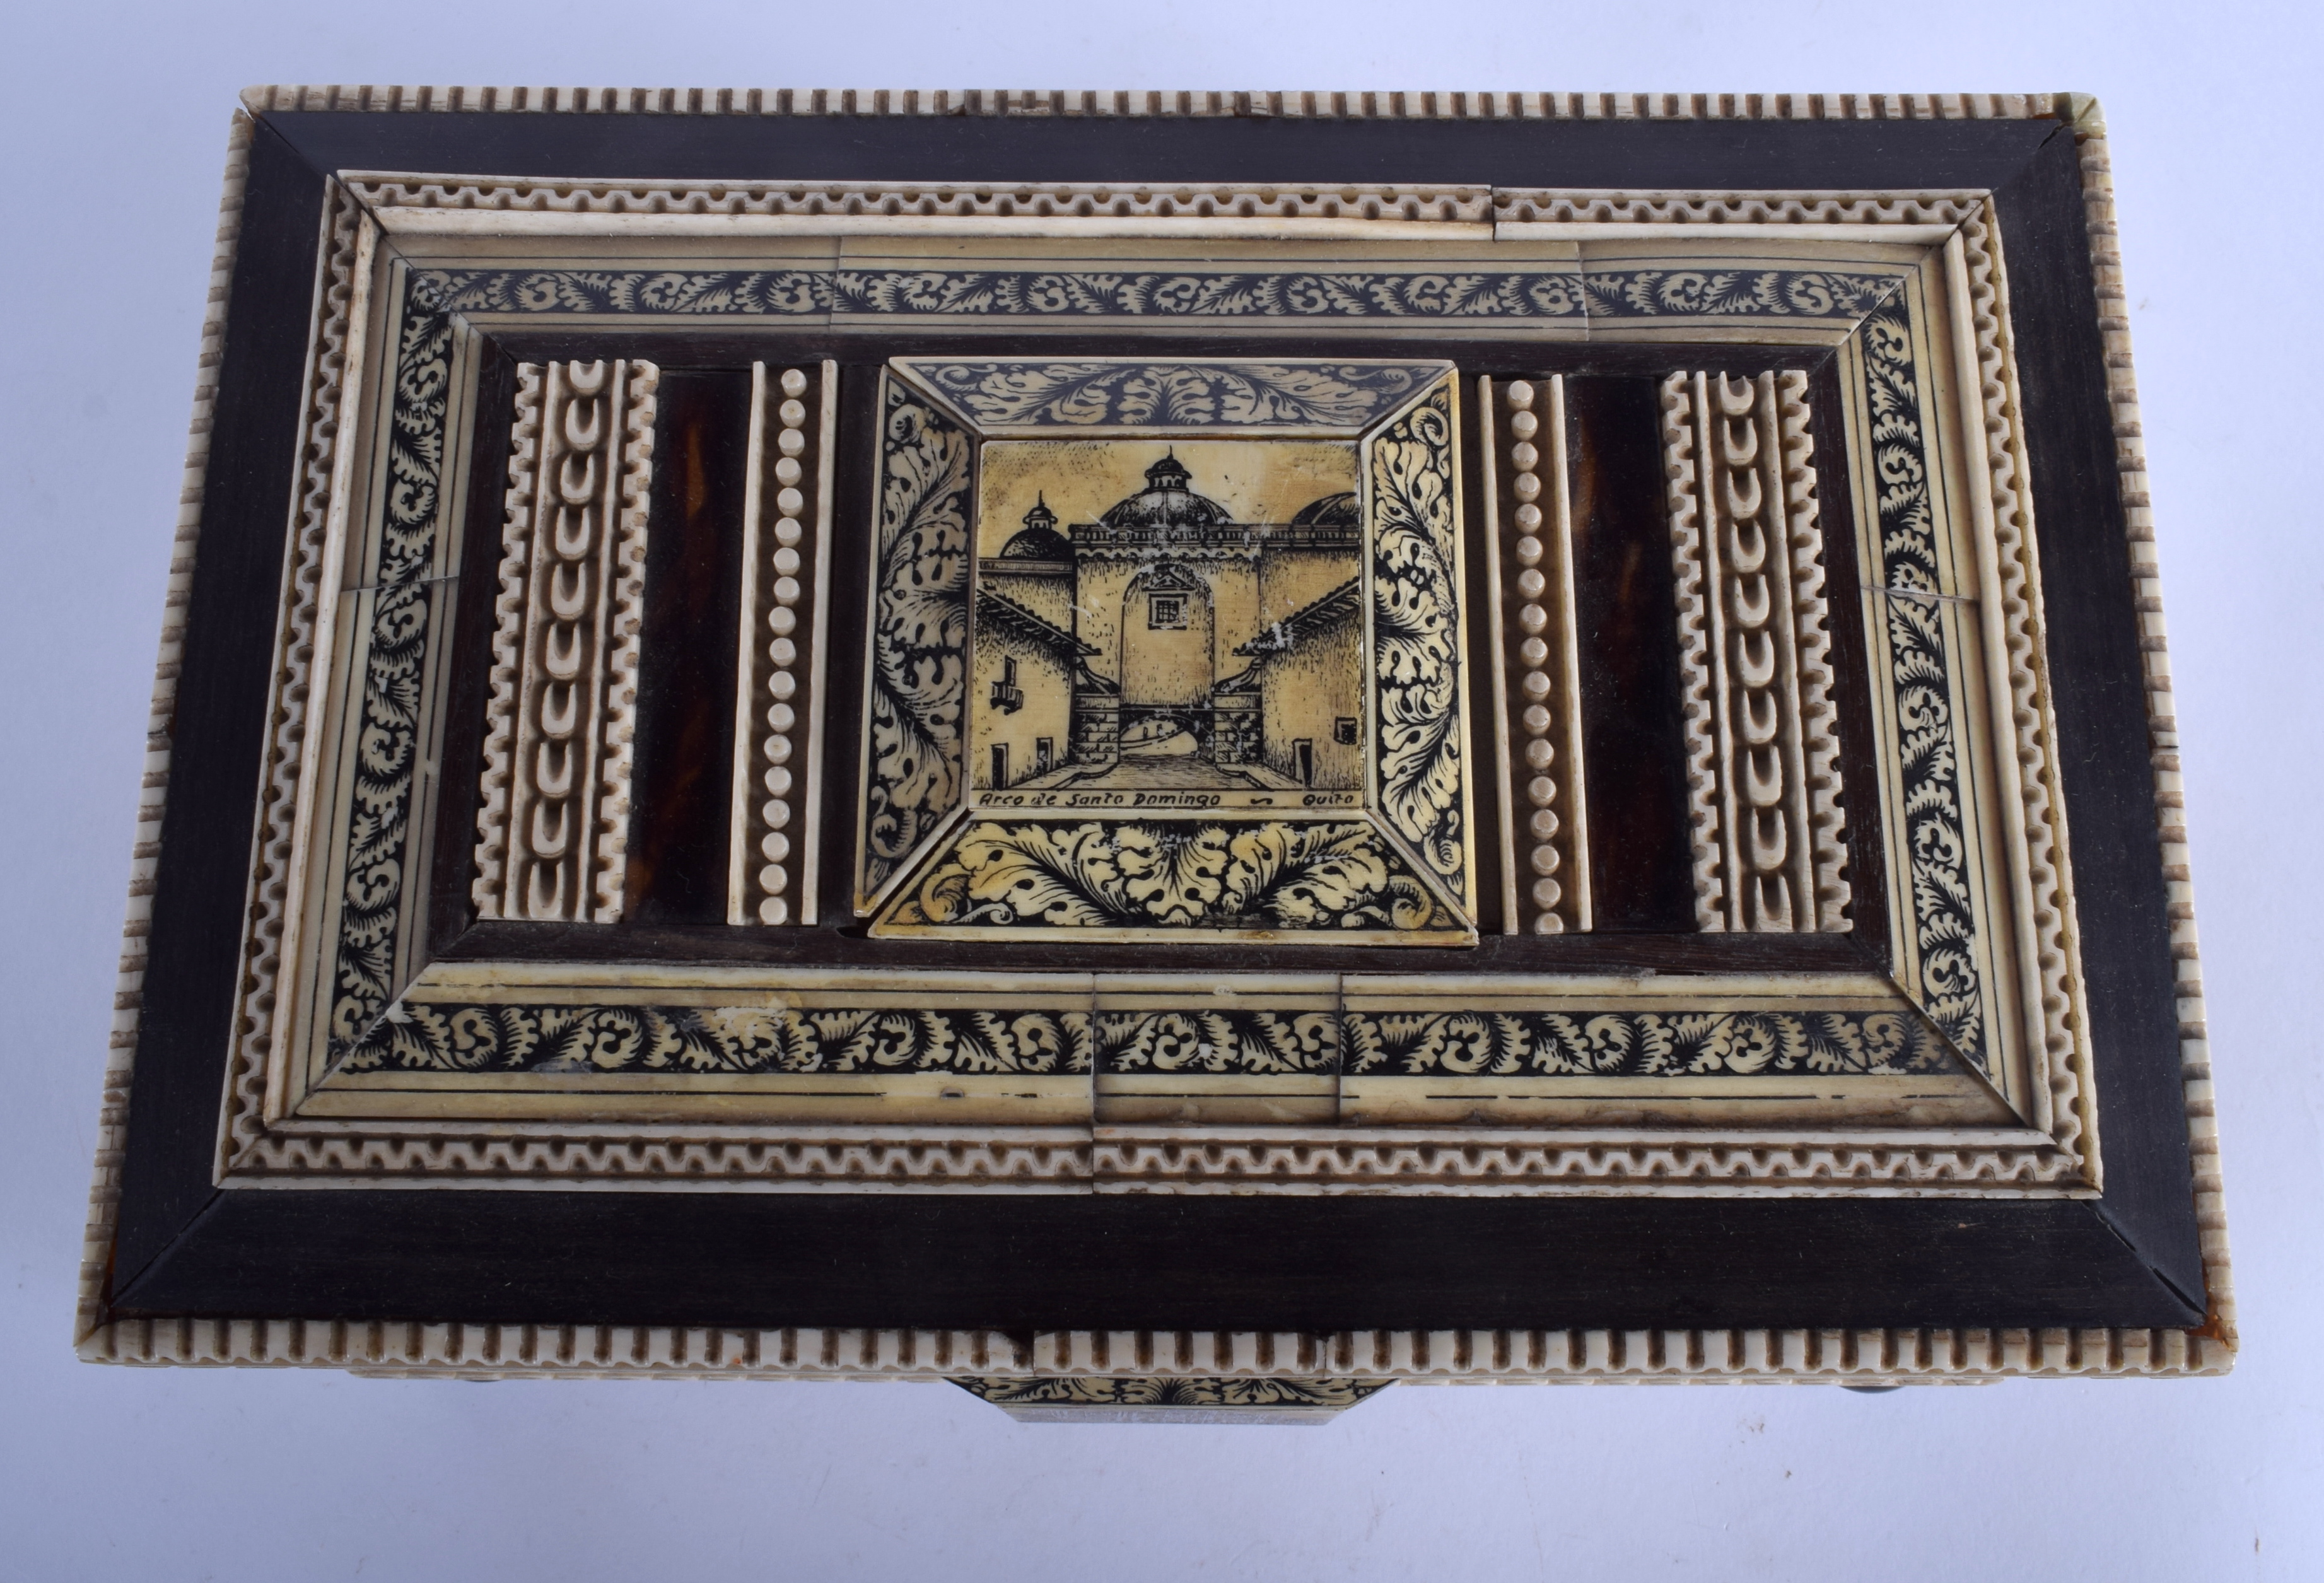 A GOOD EARLY 19TH CENTURY ANGLO INDIAN TORTOISESHELL CASKET decorated with engraved landscapes and b - Image 3 of 4